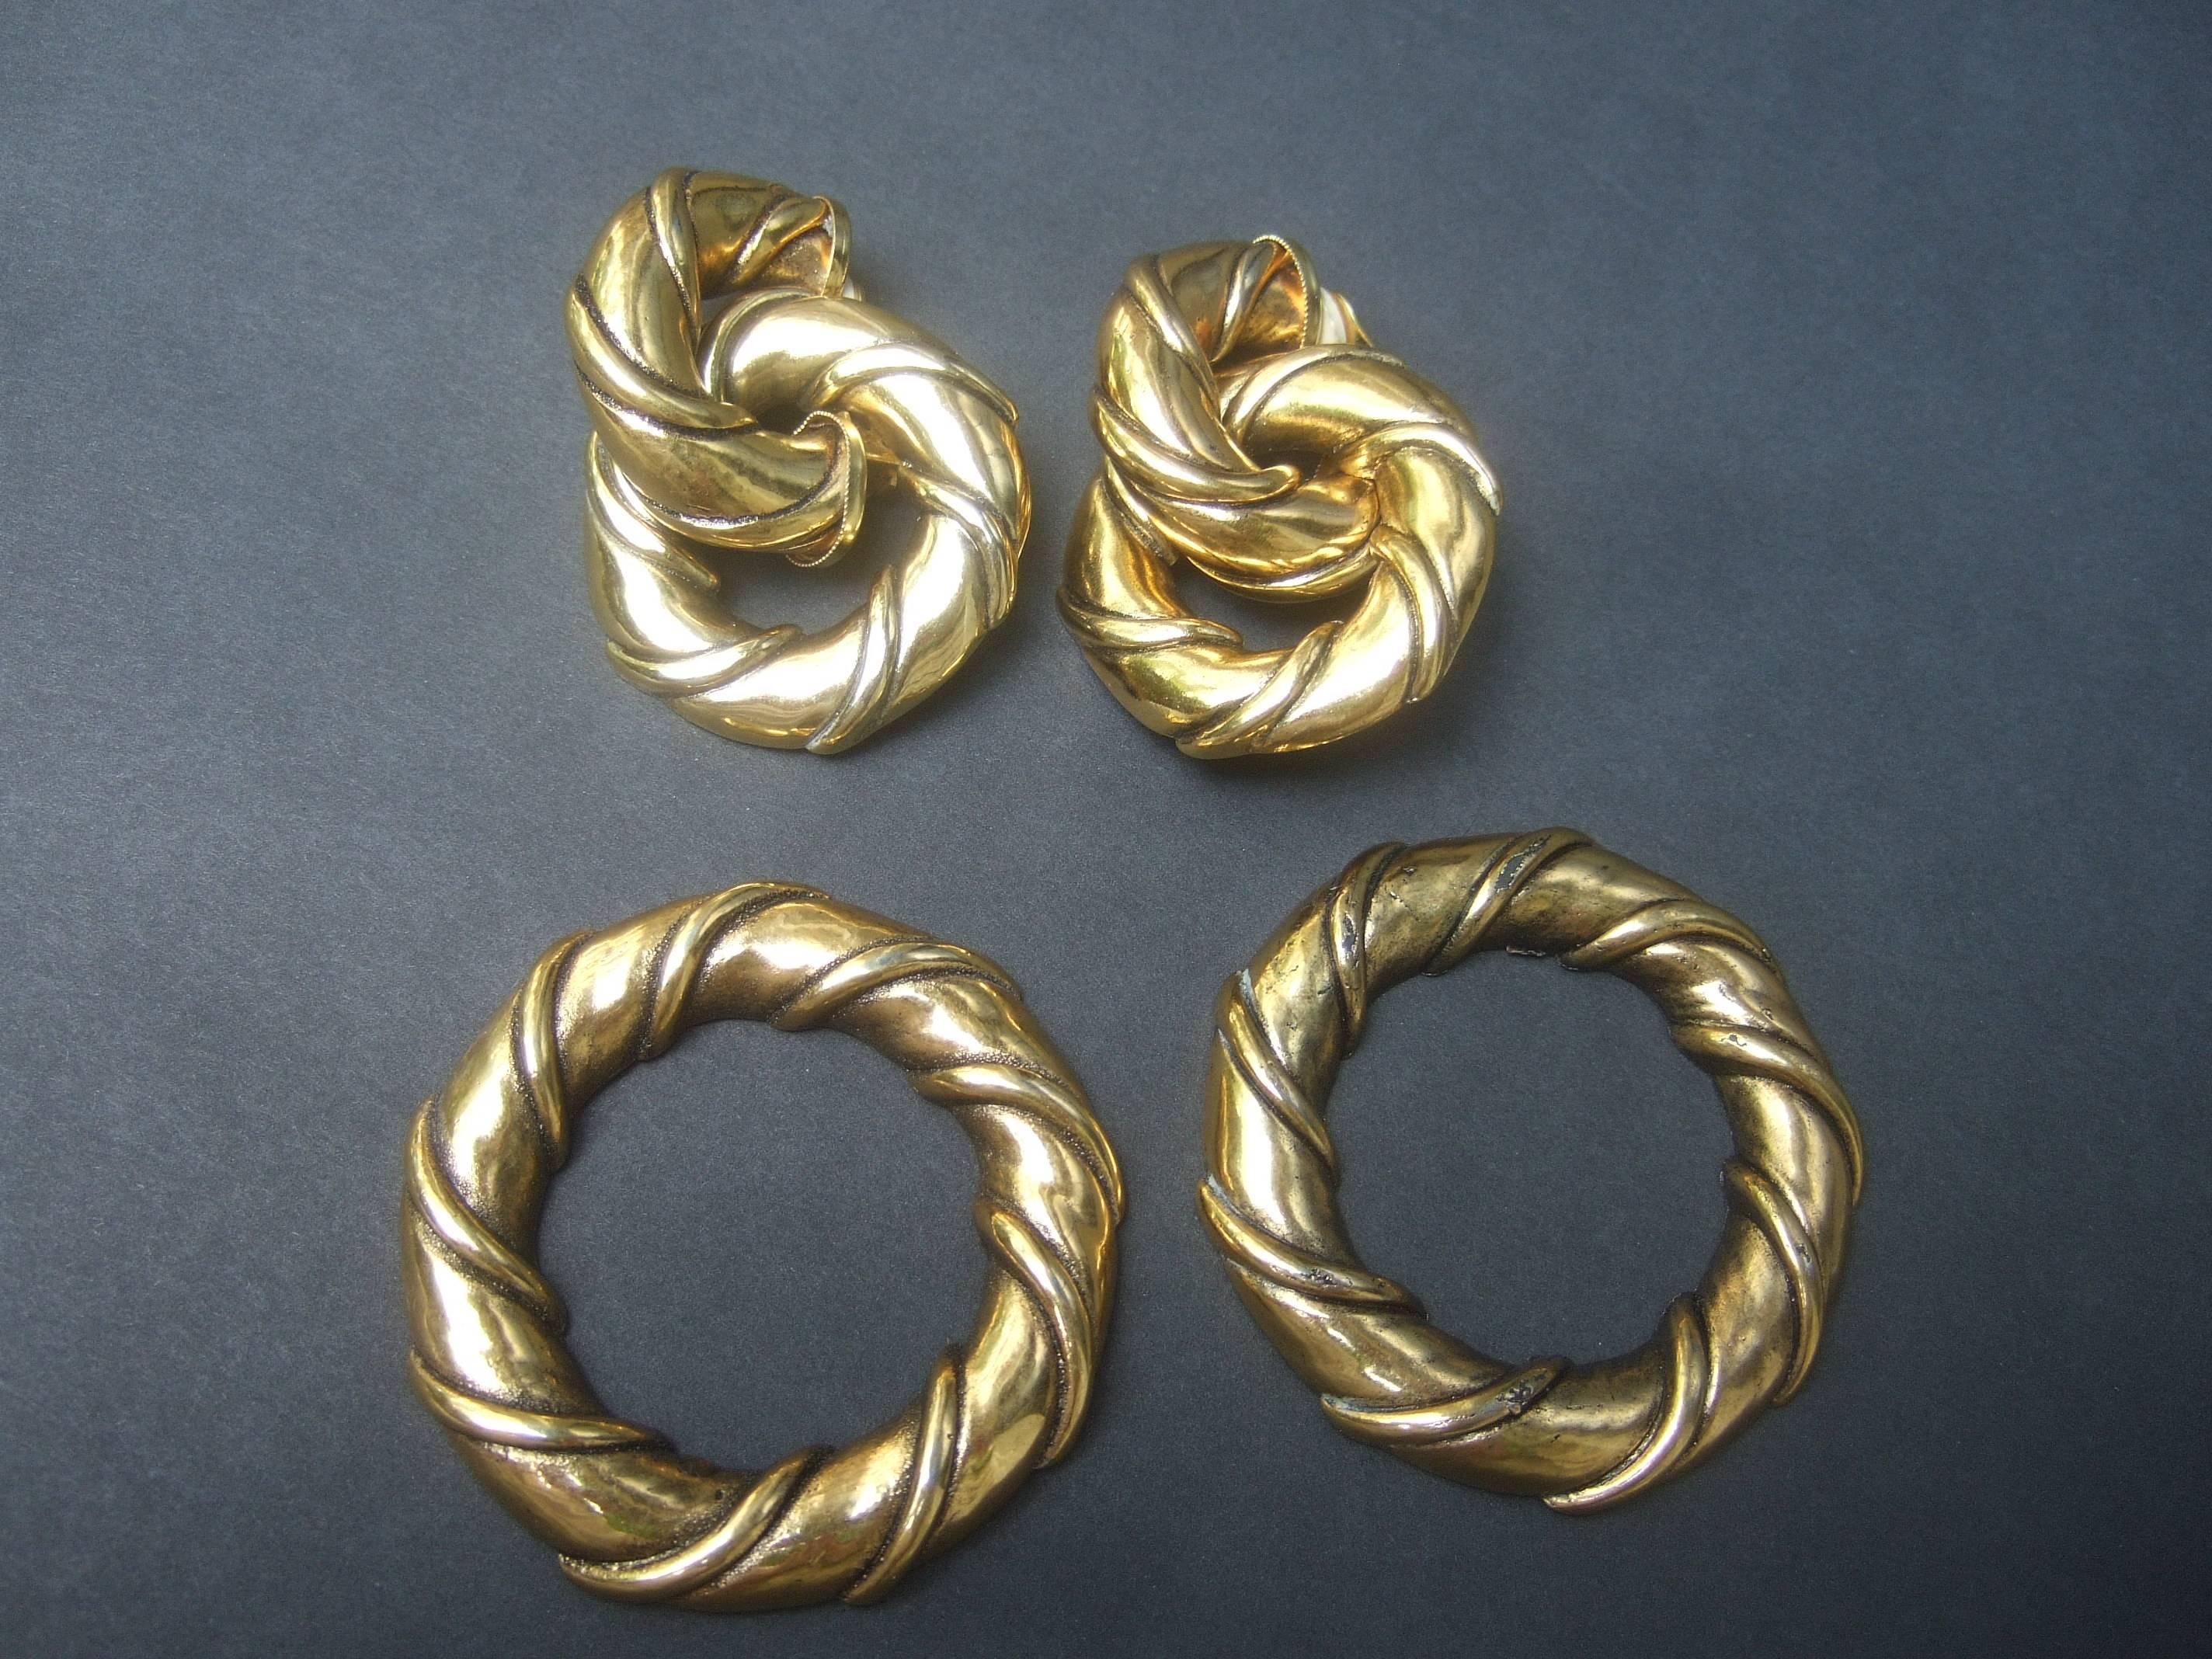  Gilt Metal Interchangeable Hoop Earrings by Une Ligne Paris  In Excellent Condition For Sale In University City, MO